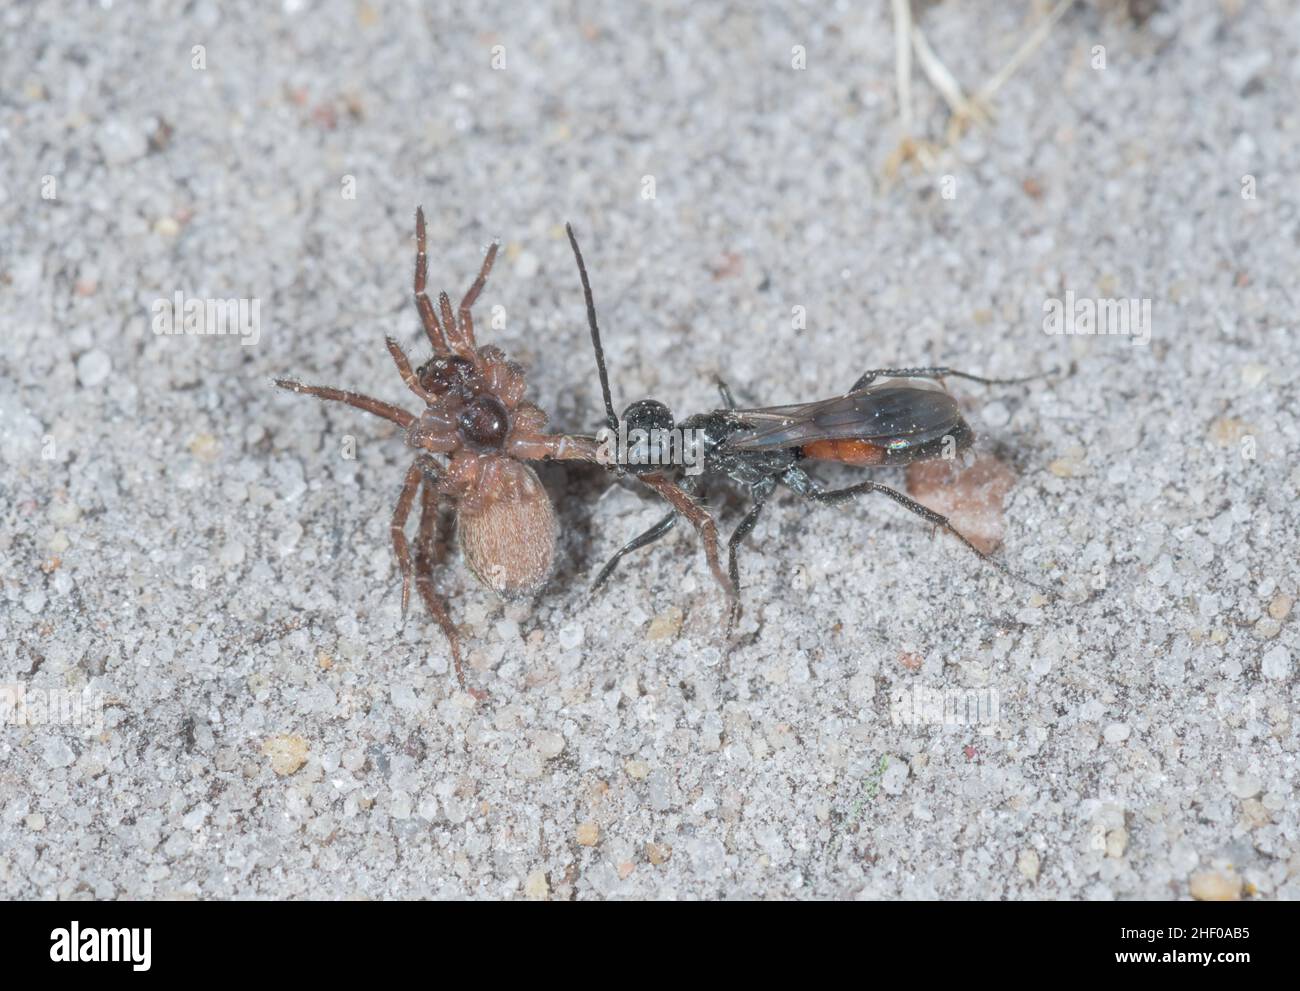 Spider hunting Wasp with (Alopecosa barbipes) prey, Pompilidae. Sussex, UK Stock Photo